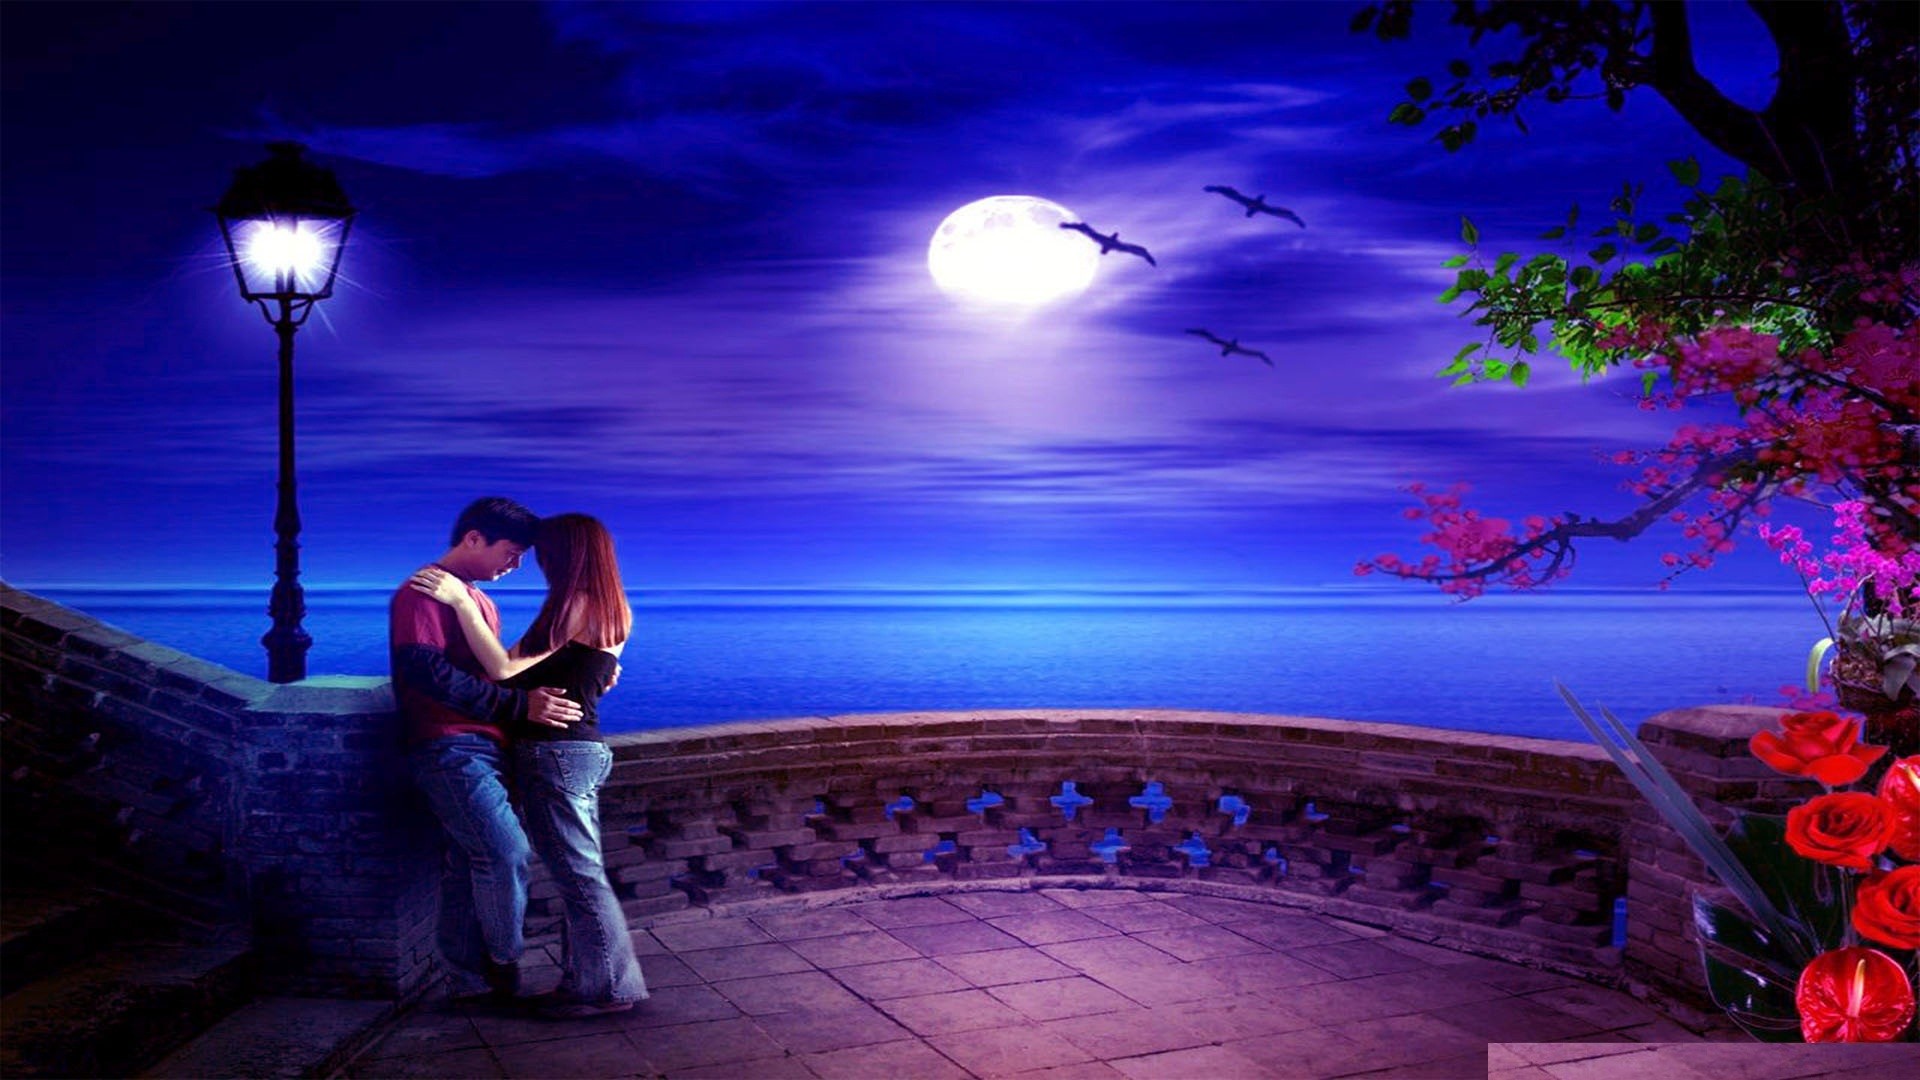 Romantic background ·① Download free beautiful wallpapers ...